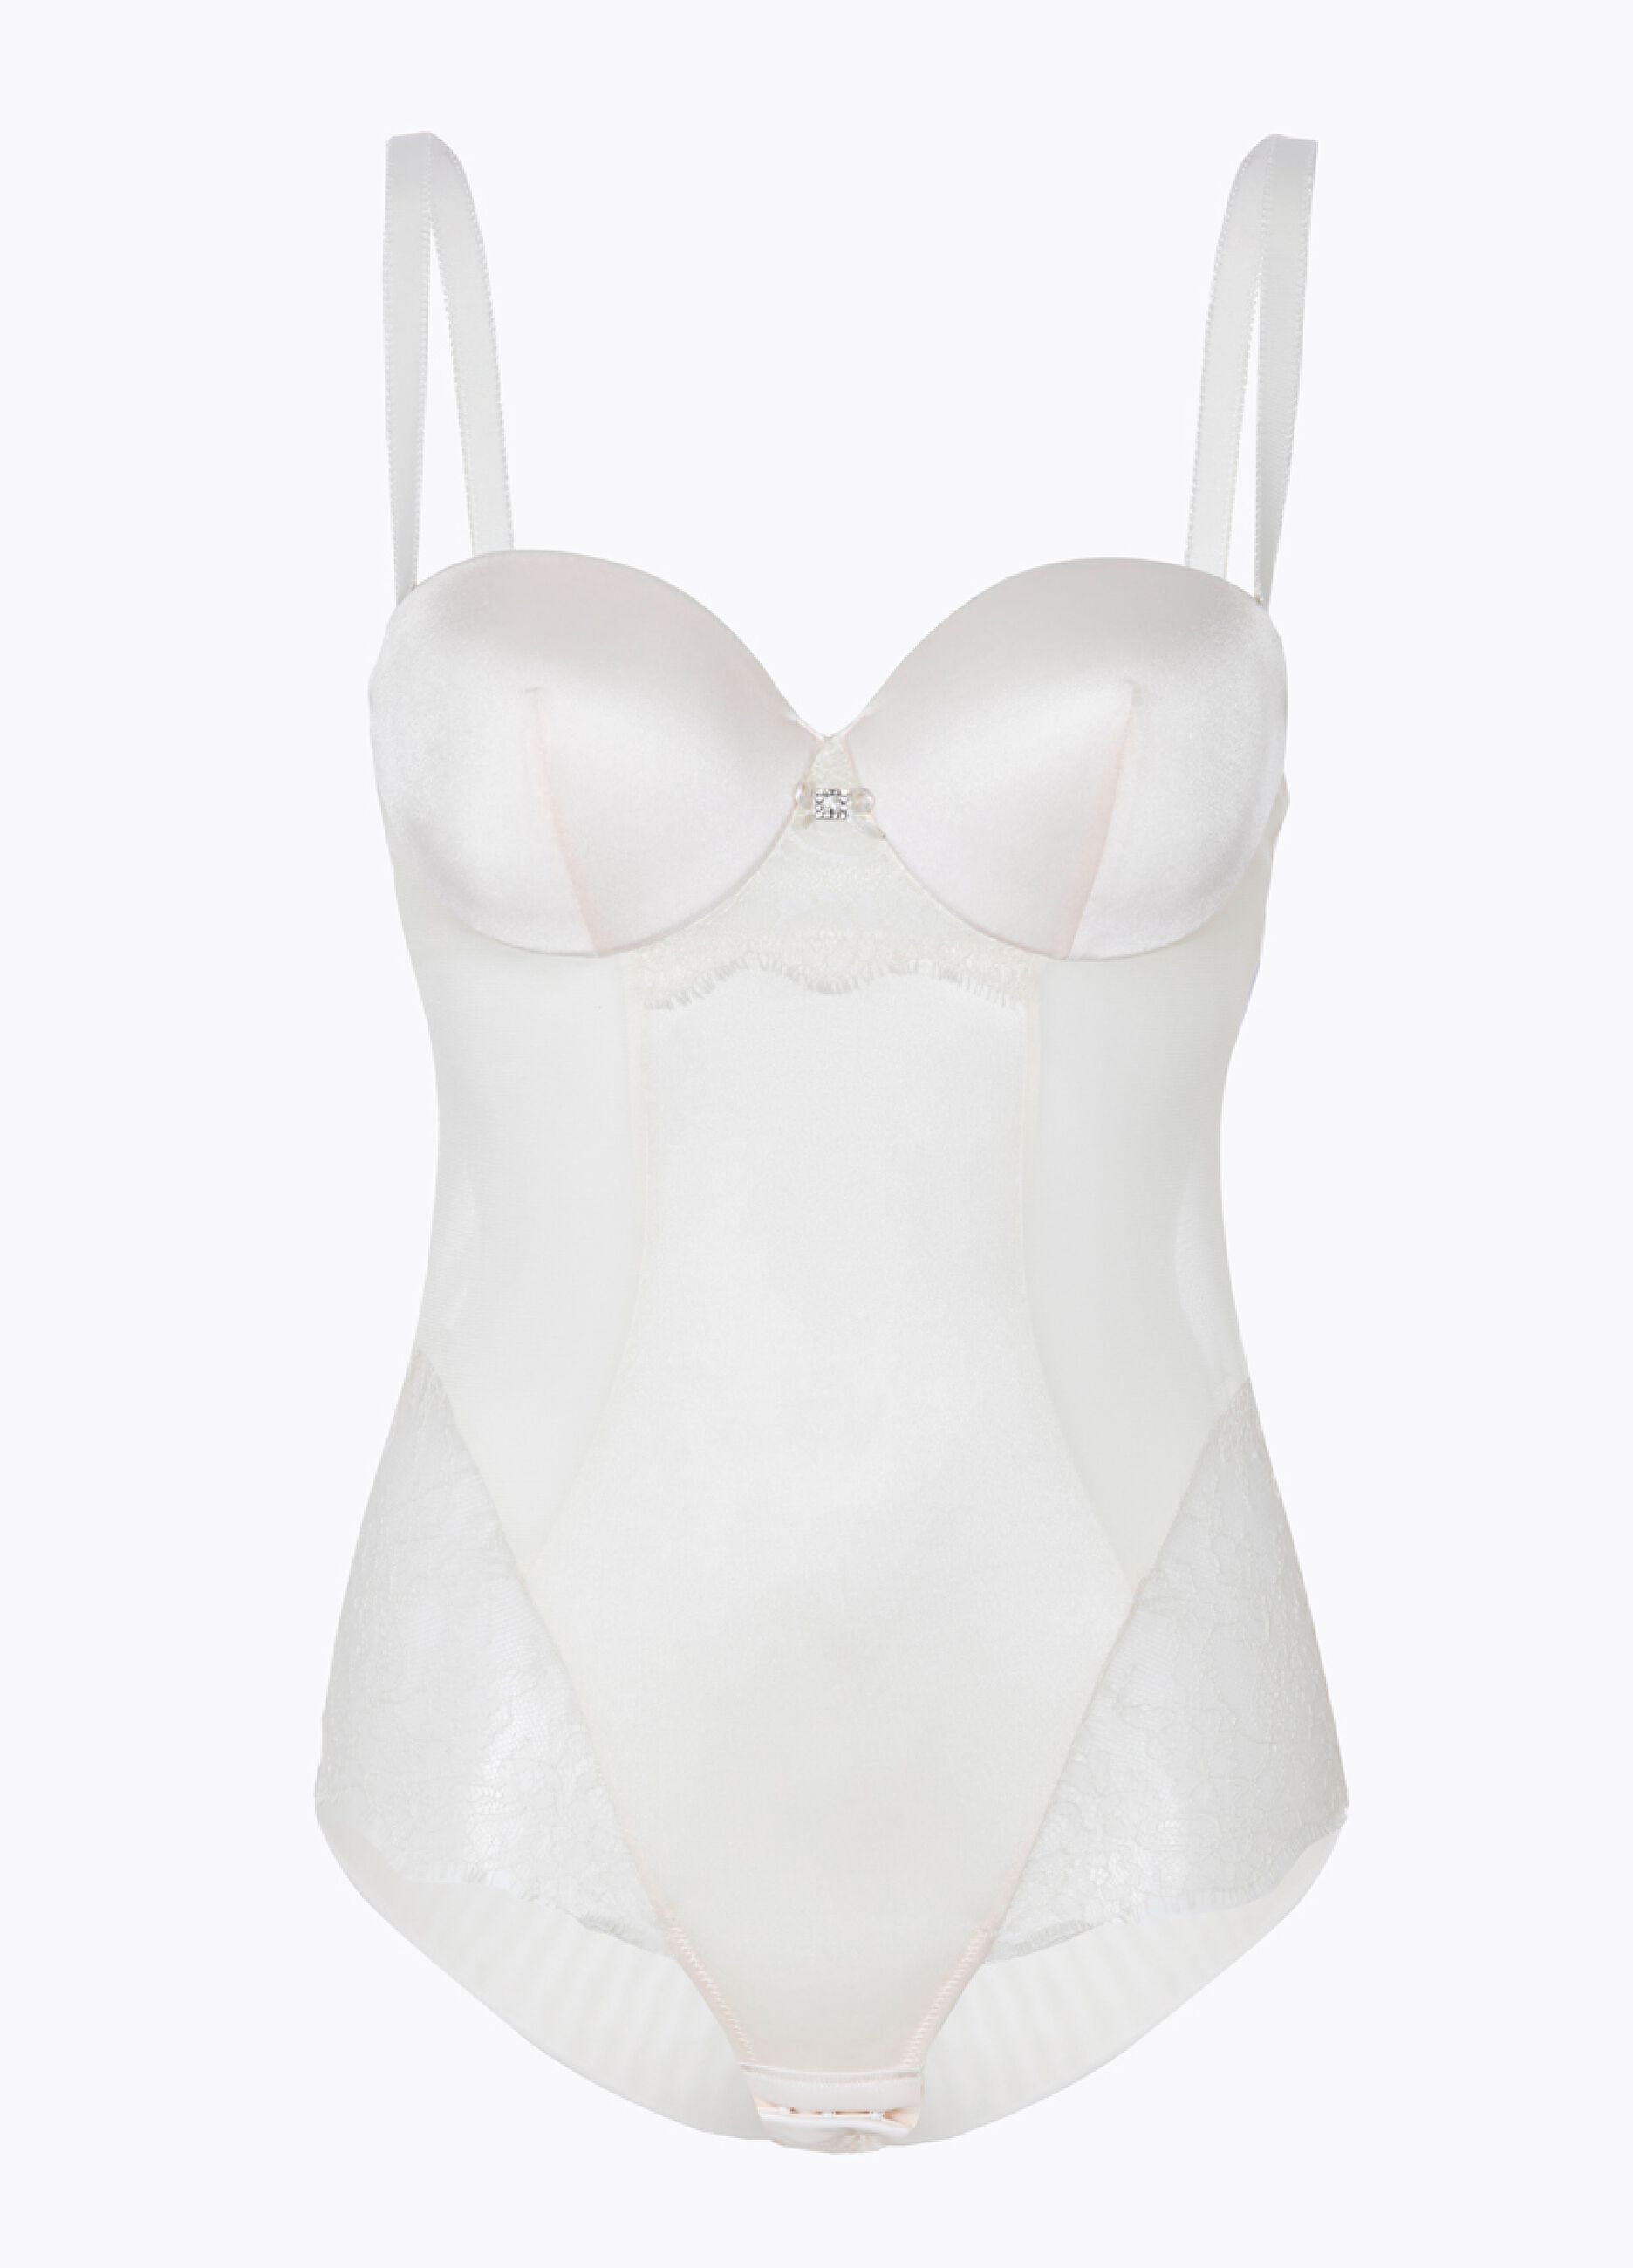 Ivory Range bodysuit in microfibre and lace